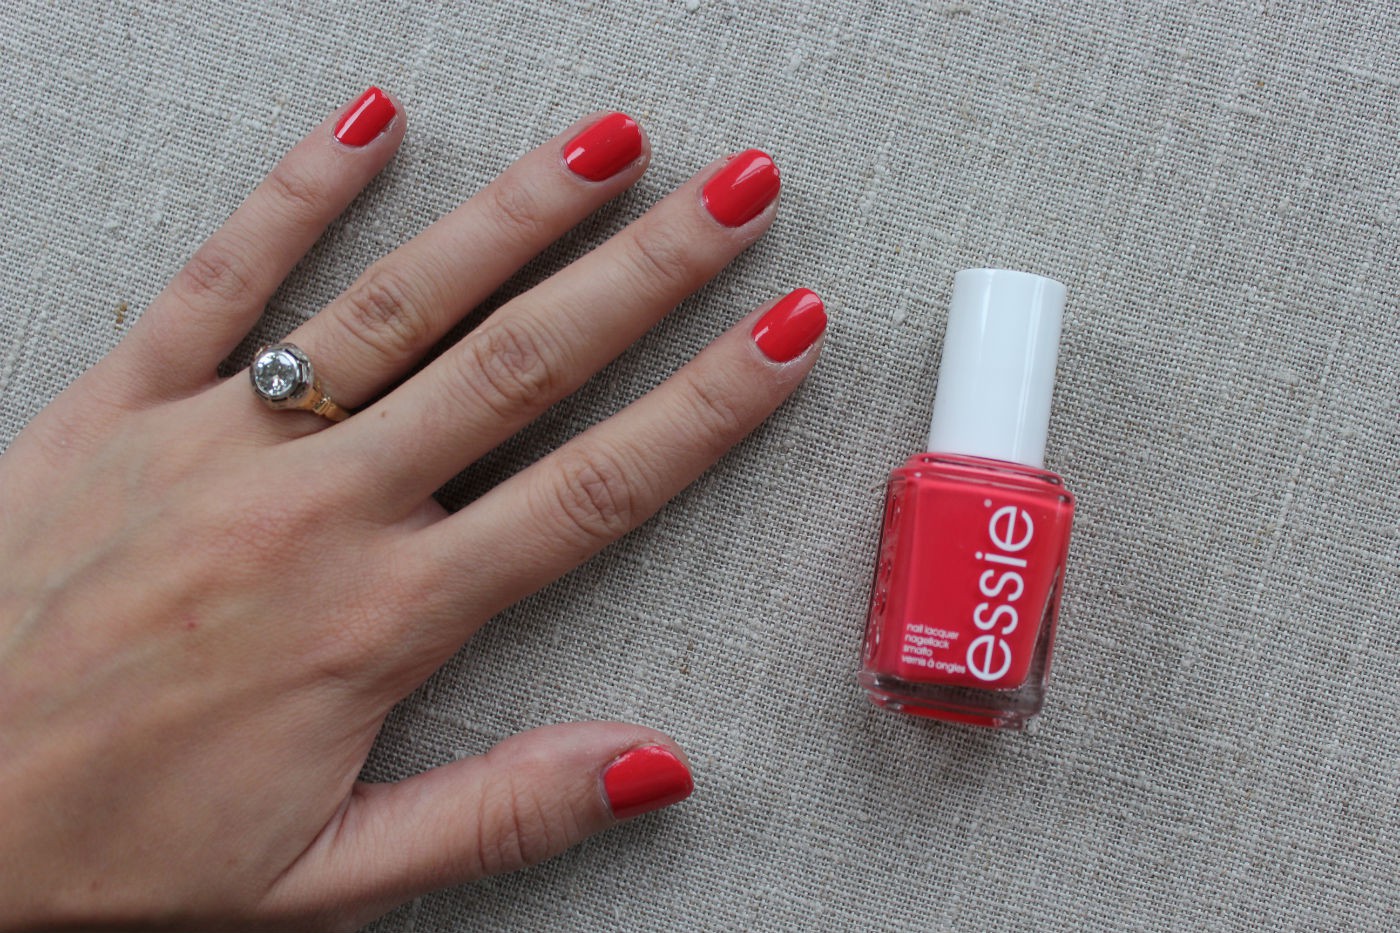 Essie Nail Polish in "Sunset Sneaks" - wide 8